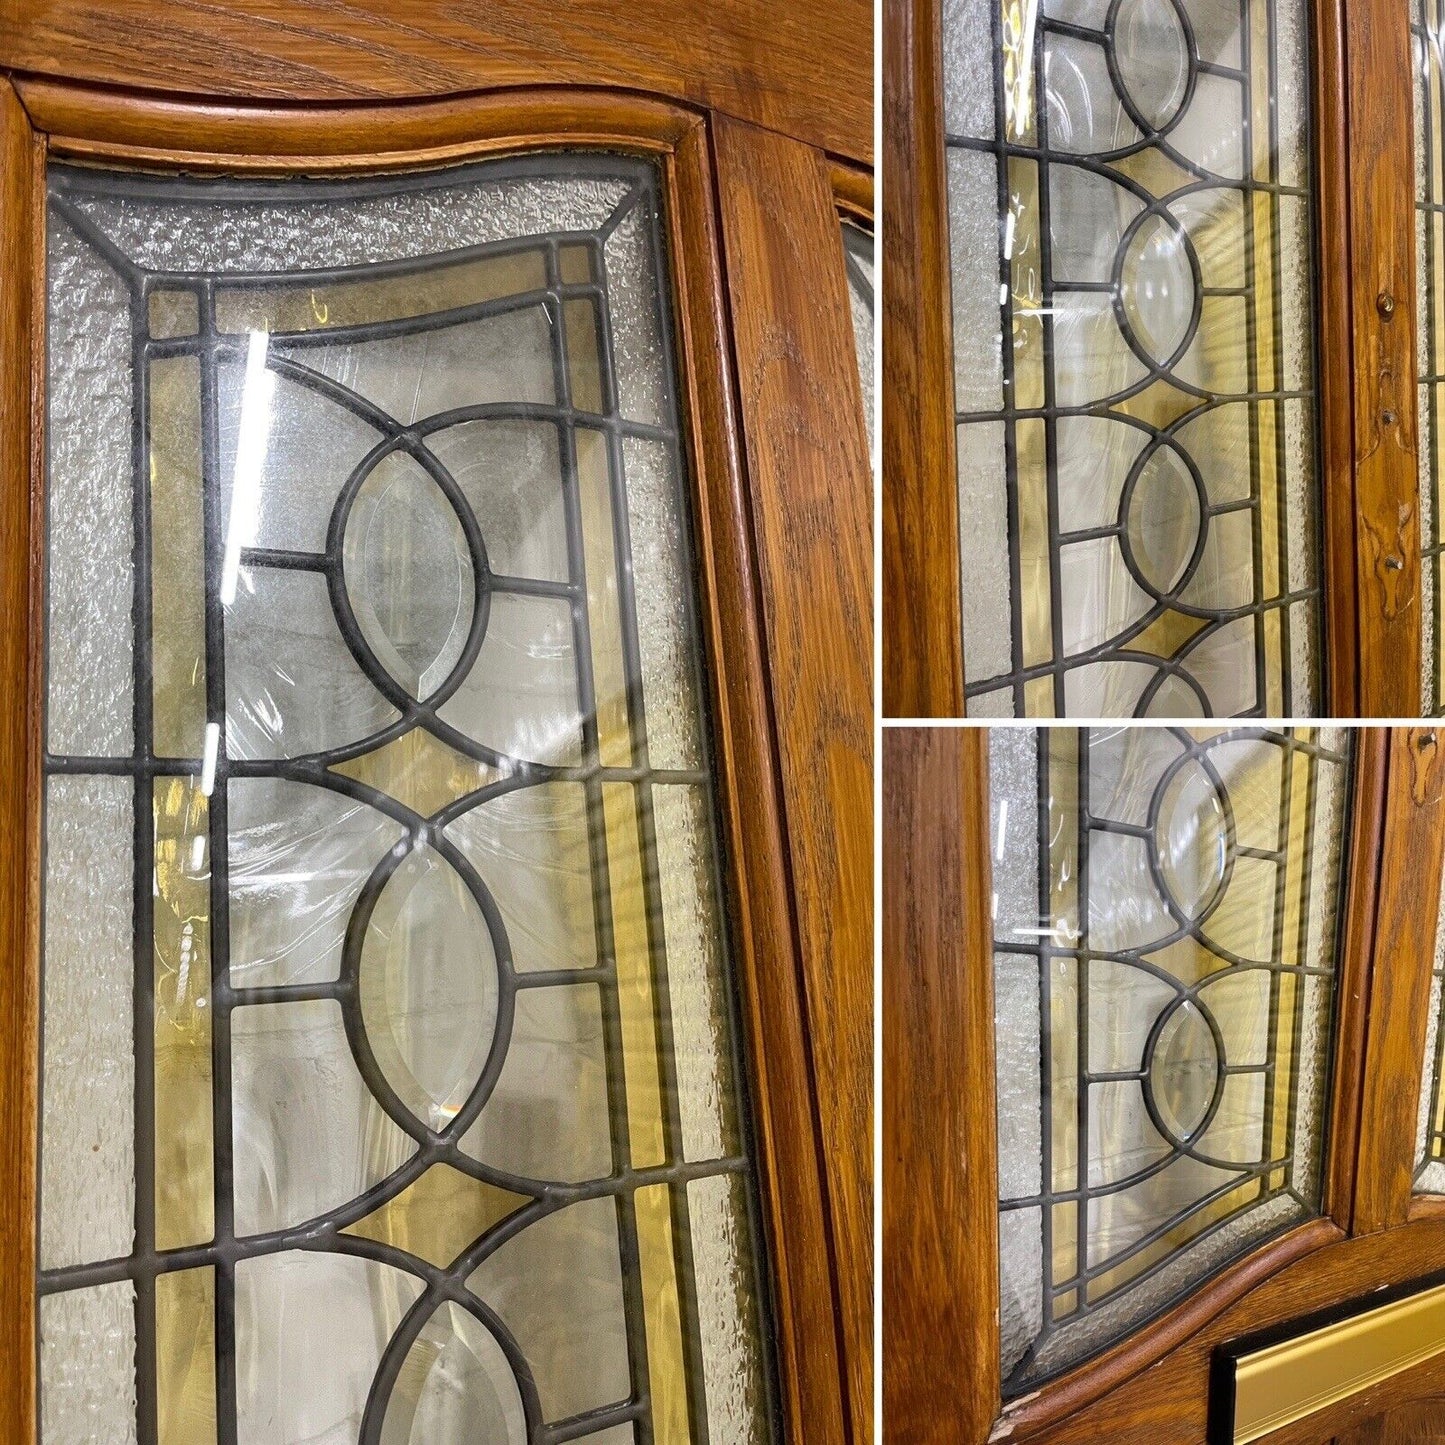 Reclaimed Style Edwardian Modern Stained Glass Front Door 2010 or 2005 x 814mm